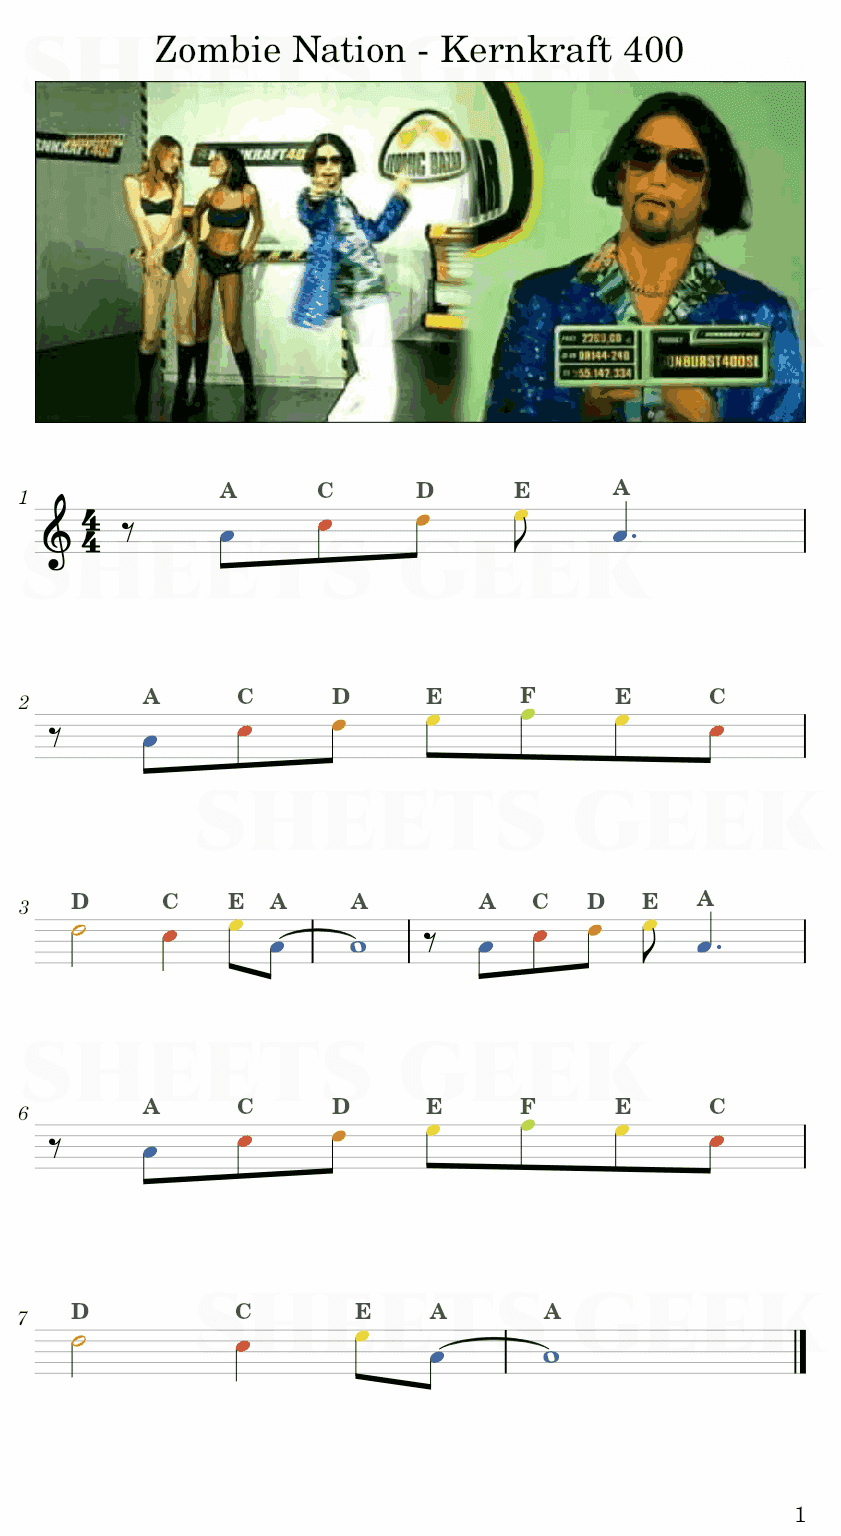 Zombie Nation - Kernkraft 400 Easy Sheet Music Free for piano, keyboard, flute, violin, sax, cello page 1